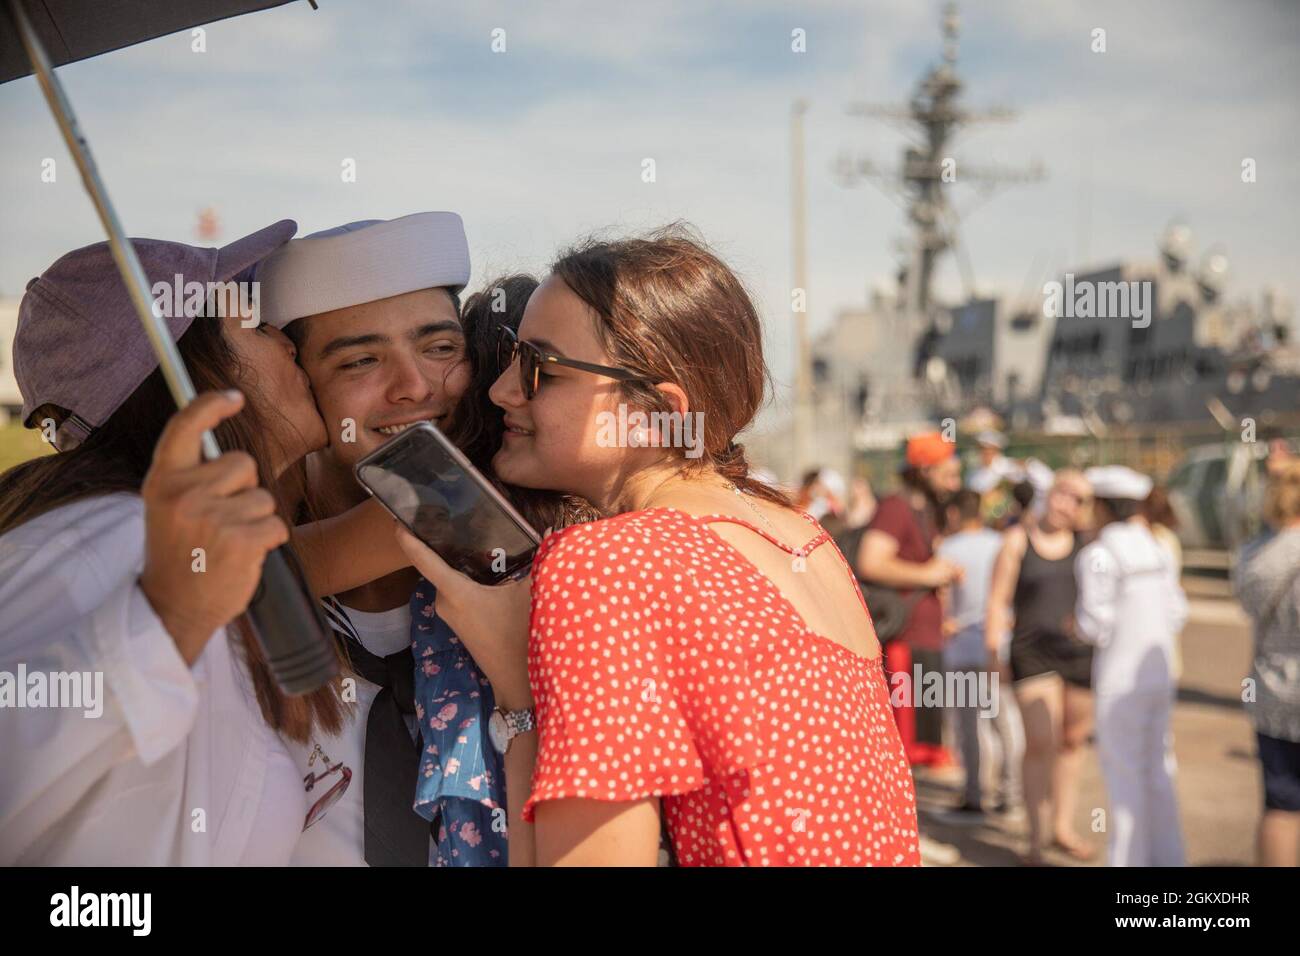 210718-N-GF955-1368  NAVAL STATION MAYPORT, Fla. (July 18, 2021) – A Sailor assigned to the Arleigh Burke-class guided-missile destroyer USS Donald Cook (DDG 75) embraces his family following the ship’s arrival to Naval Station Mayport, Florida. Donald Cook was a Forward Deployed Naval Forces-Europe (FDNF-E) destroyer at Naval Station Rota, Spain for seven years before a homeport shift to Naval Station Mayport. Stock Photo